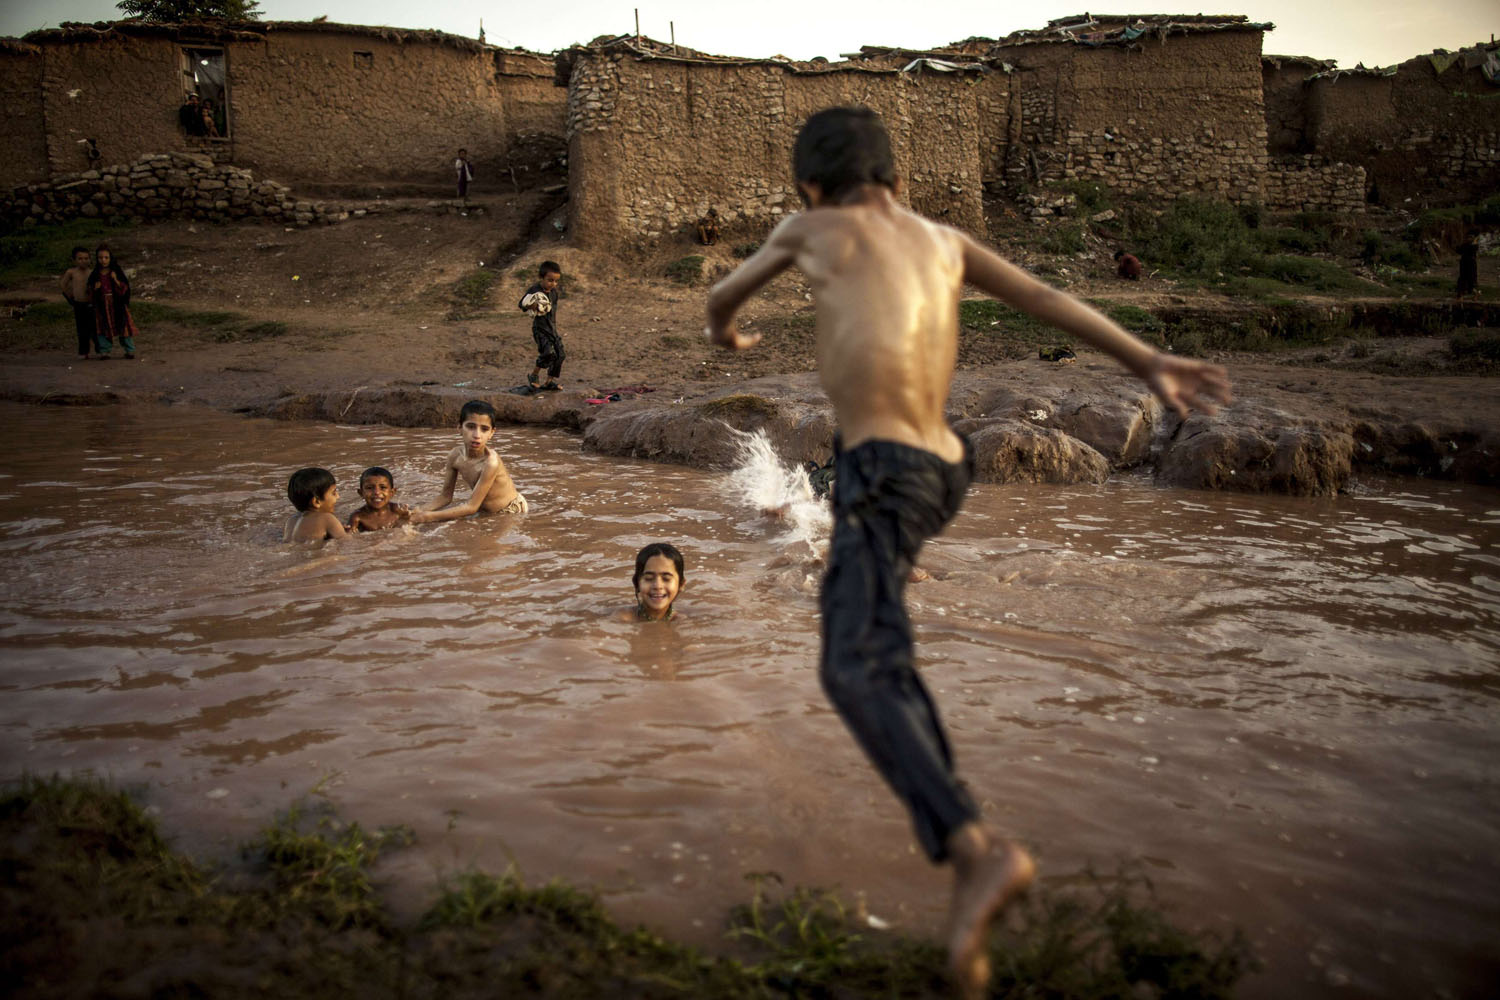 A boy, whose his family fled military operations in the western tribal area, jumps into a stream in a slum on the outskirts of Islamabad